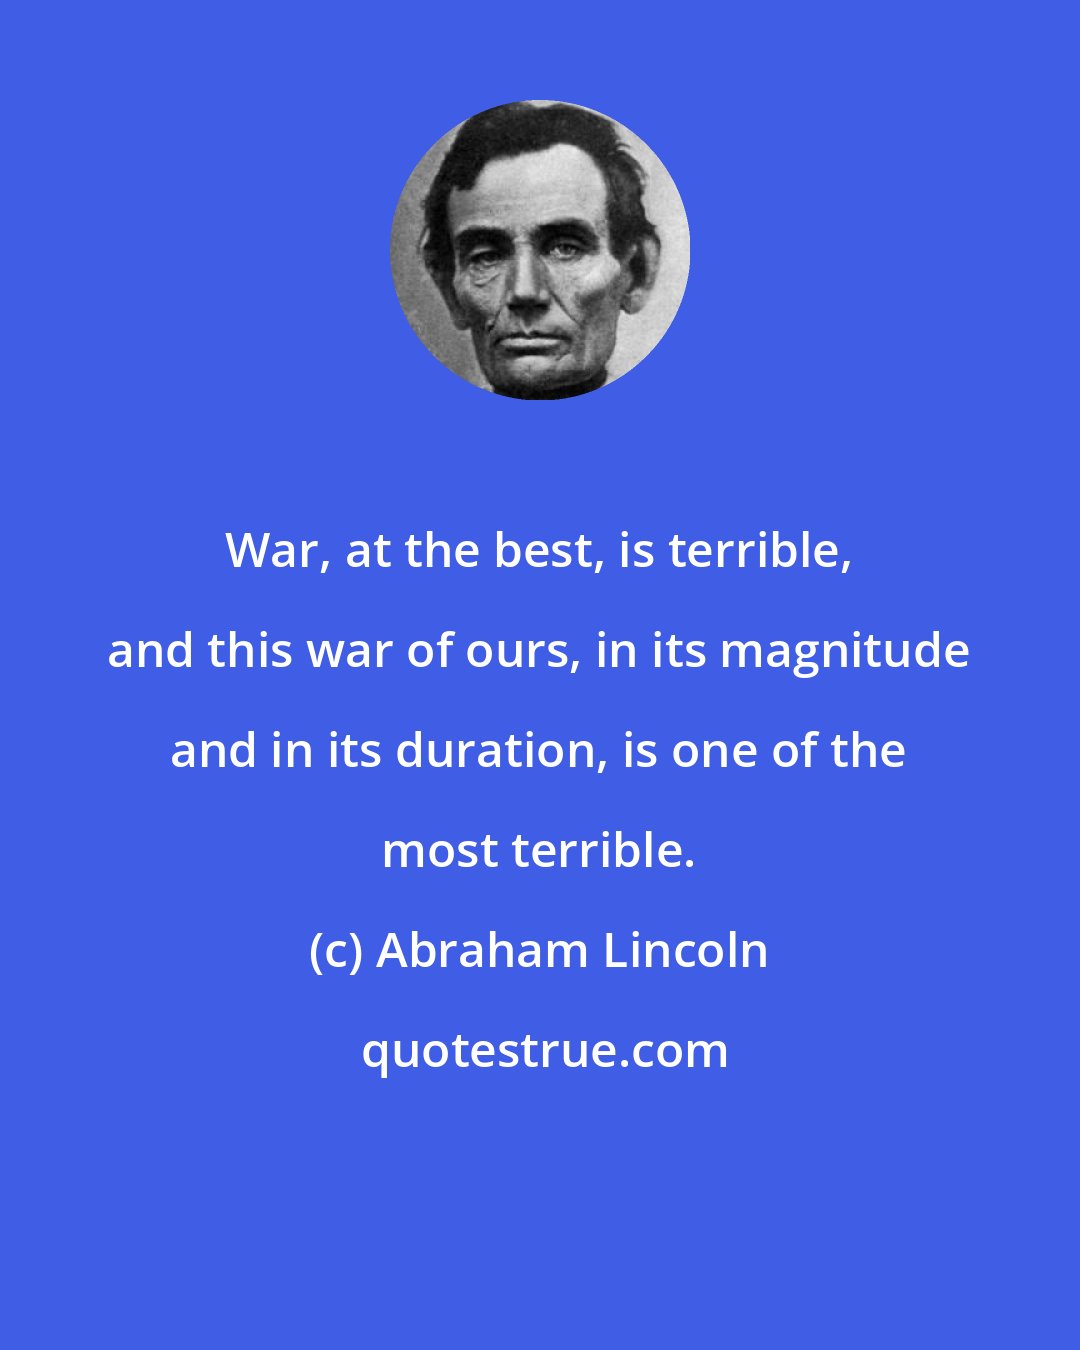 Abraham Lincoln: War, at the best, is terrible, and this war of ours, in its magnitude and in its duration, is one of the most terrible.